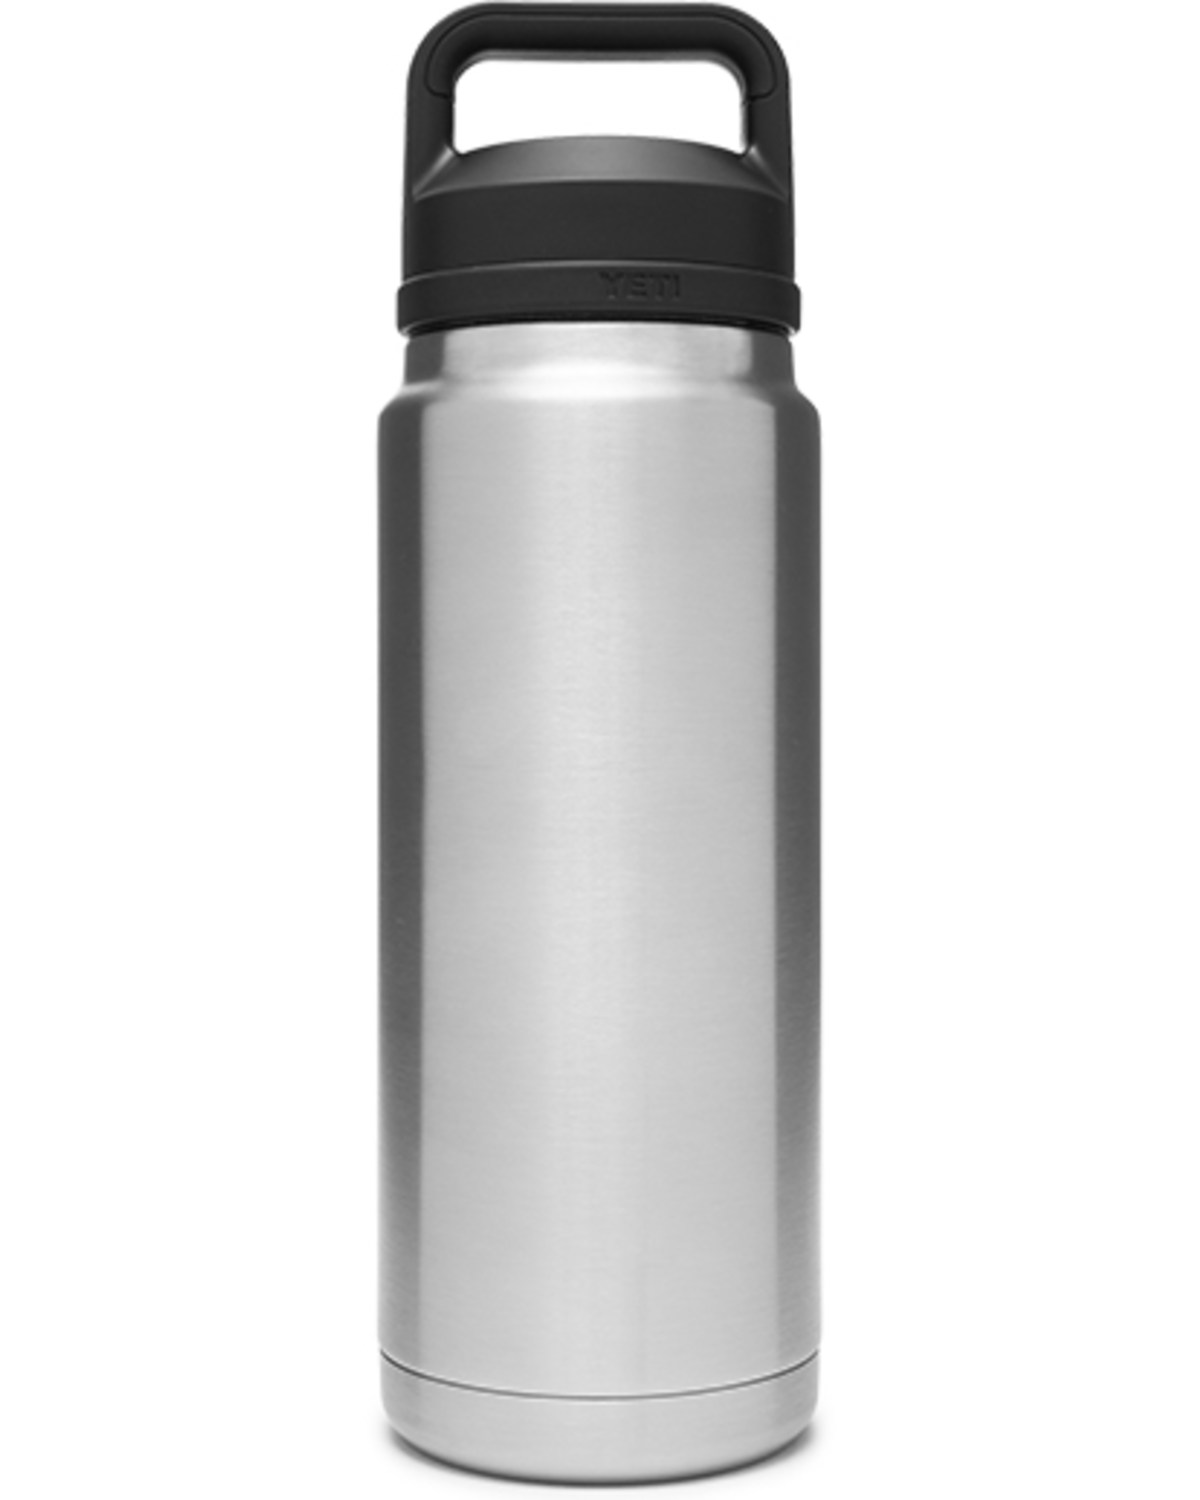 yeti rambler 26oz vacuum insulated stainless steel bottle with cap